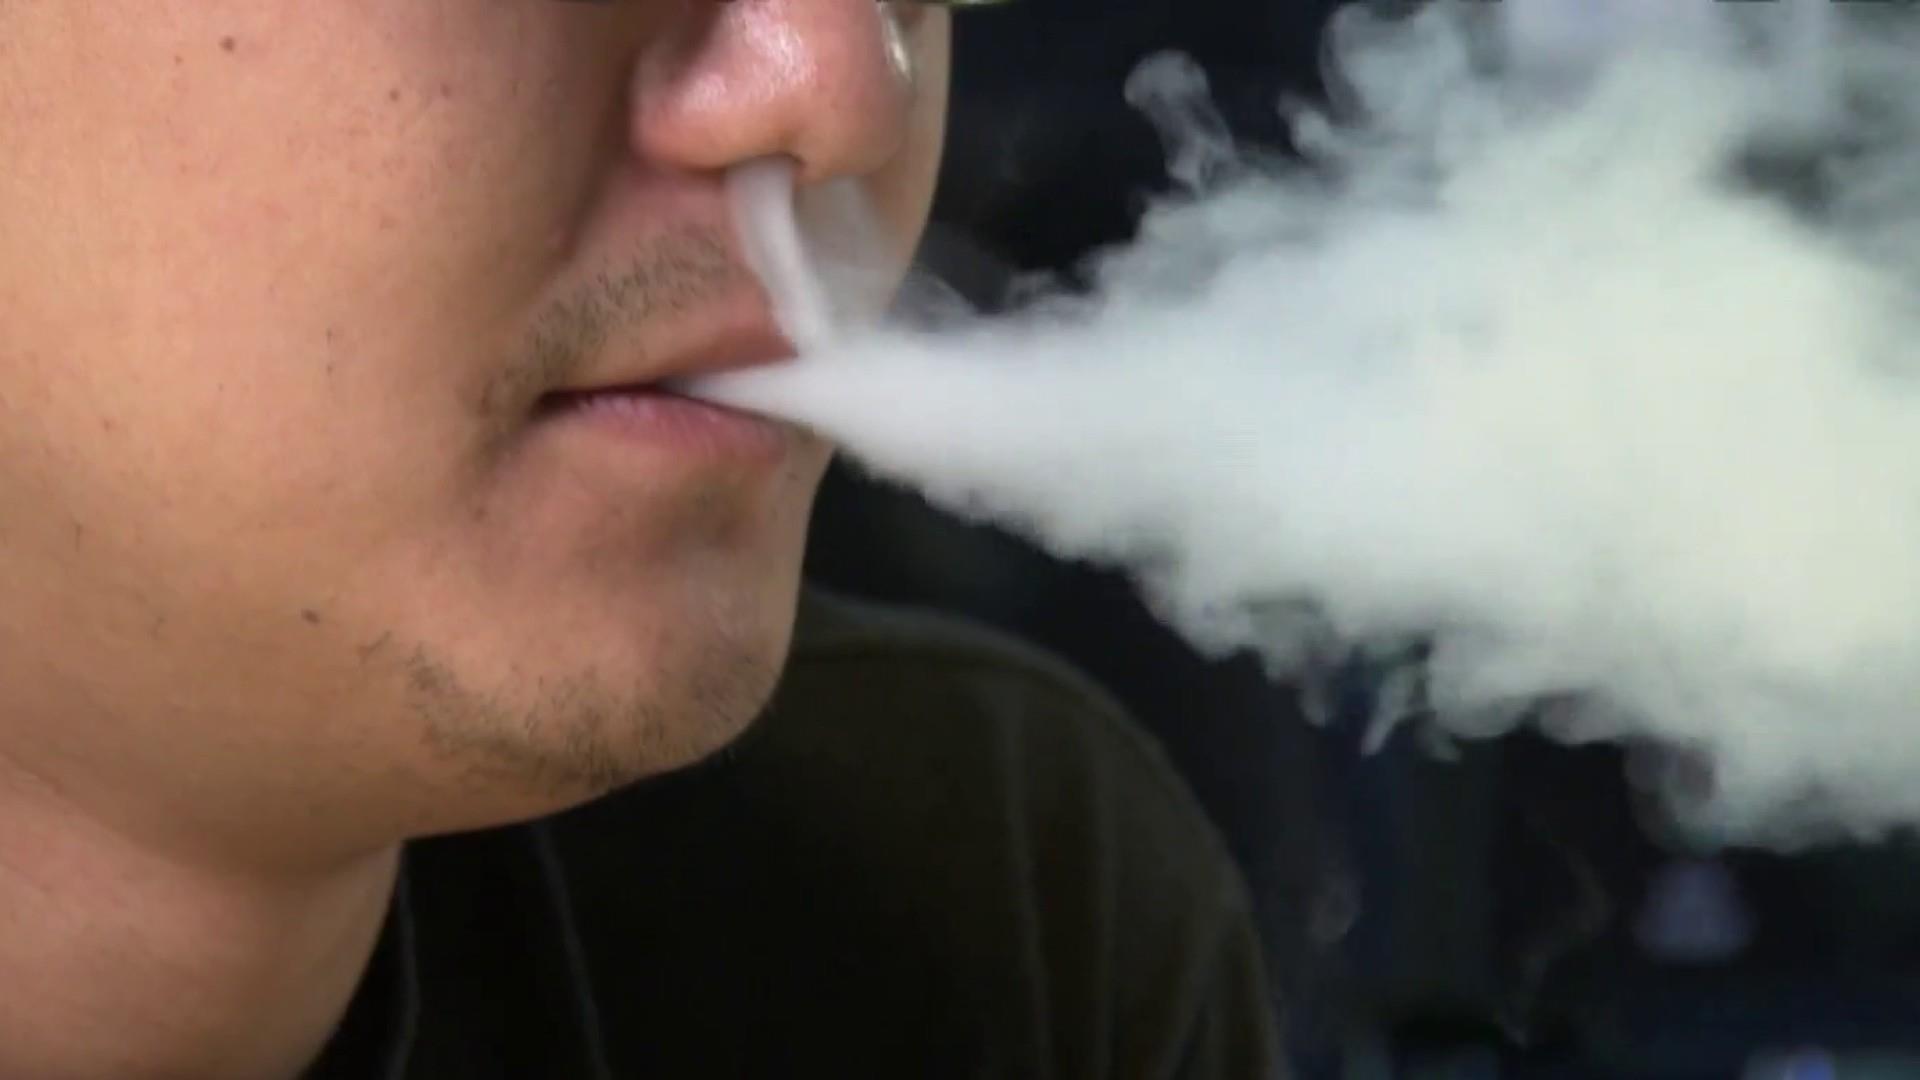 E-cigarettes can hook teens, raise risk of smoking, report finds